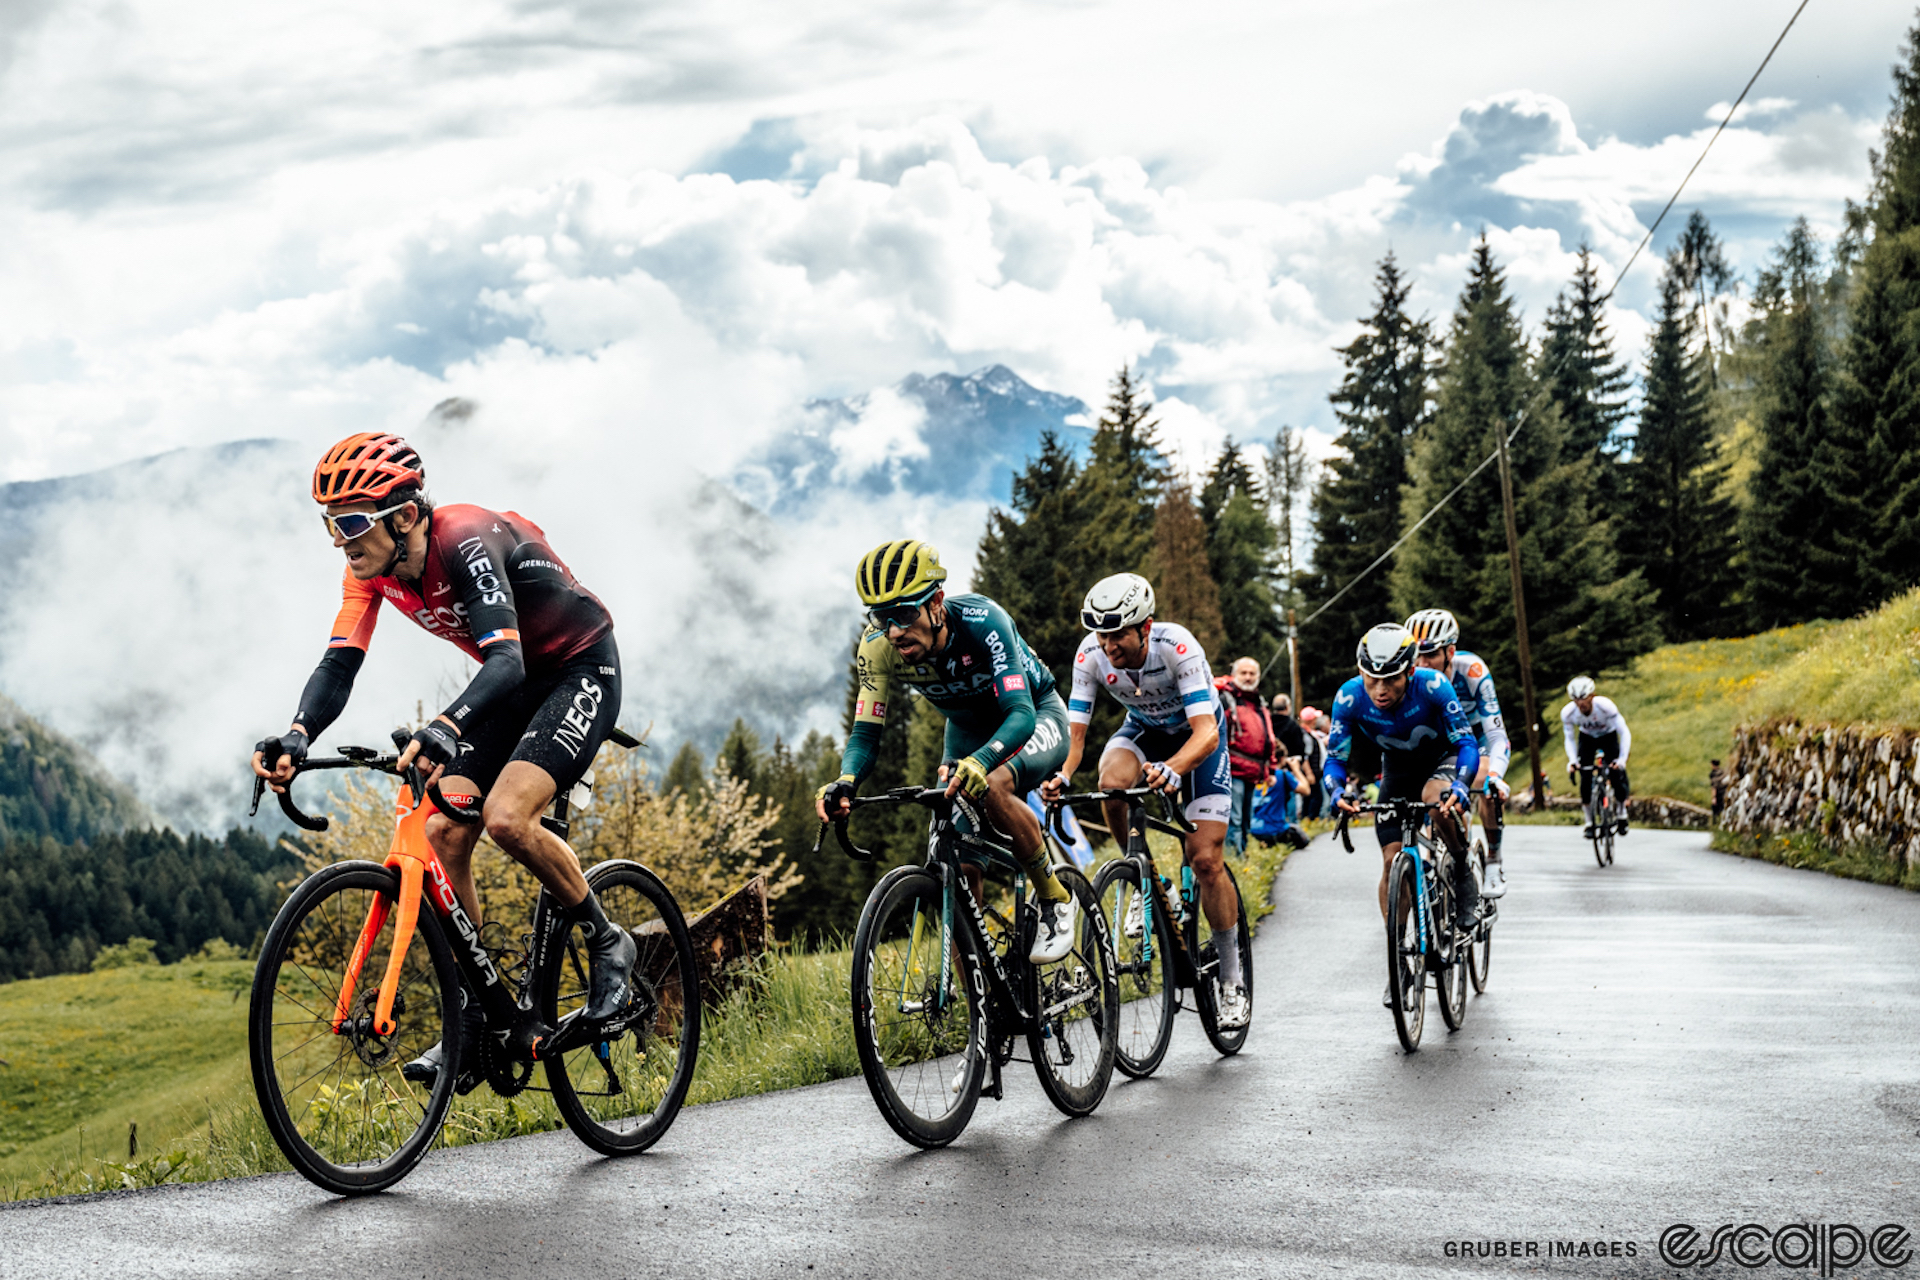 Dani Martinez is locked on Geraint Thomas' wheel as a small group of riders ascends a climb in the 2024 Giro d'Italia. The road is wet, the landscape a lush green, and broken clouds drift over the mountain ridge behind them.